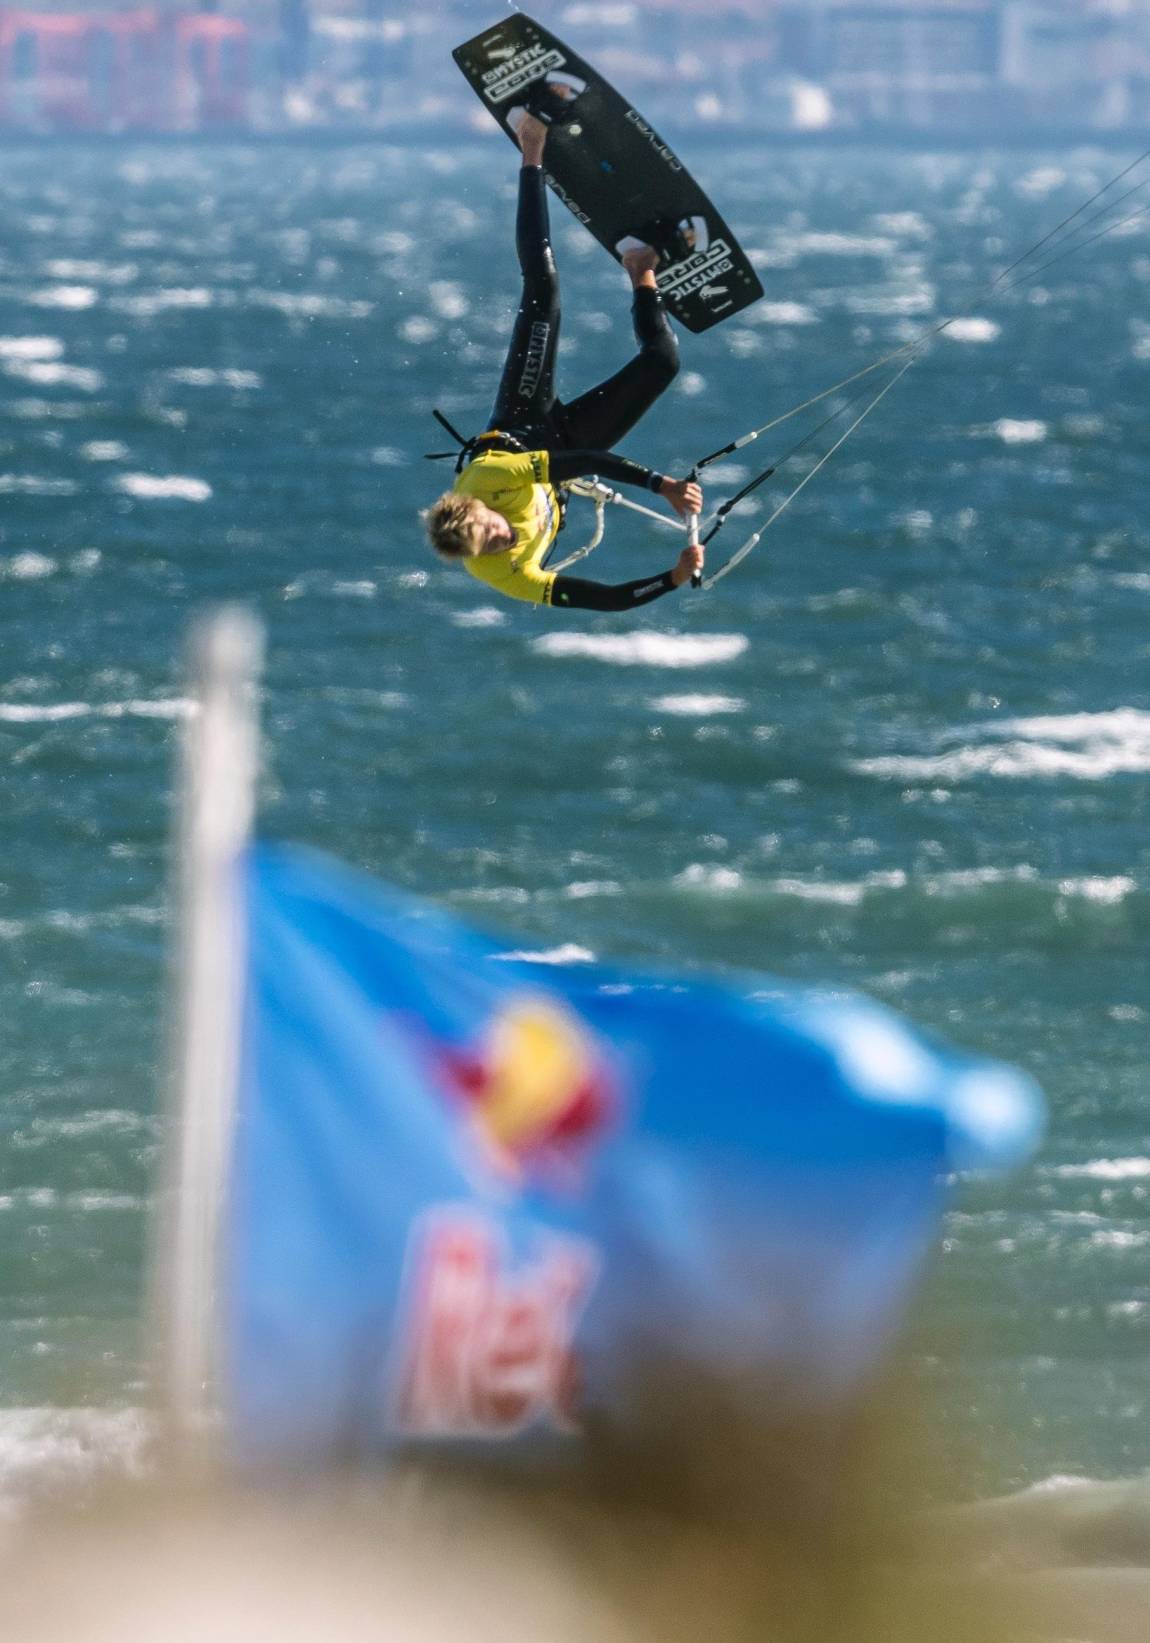 Kitesurfing For Beginners Guide Tips To Get Started